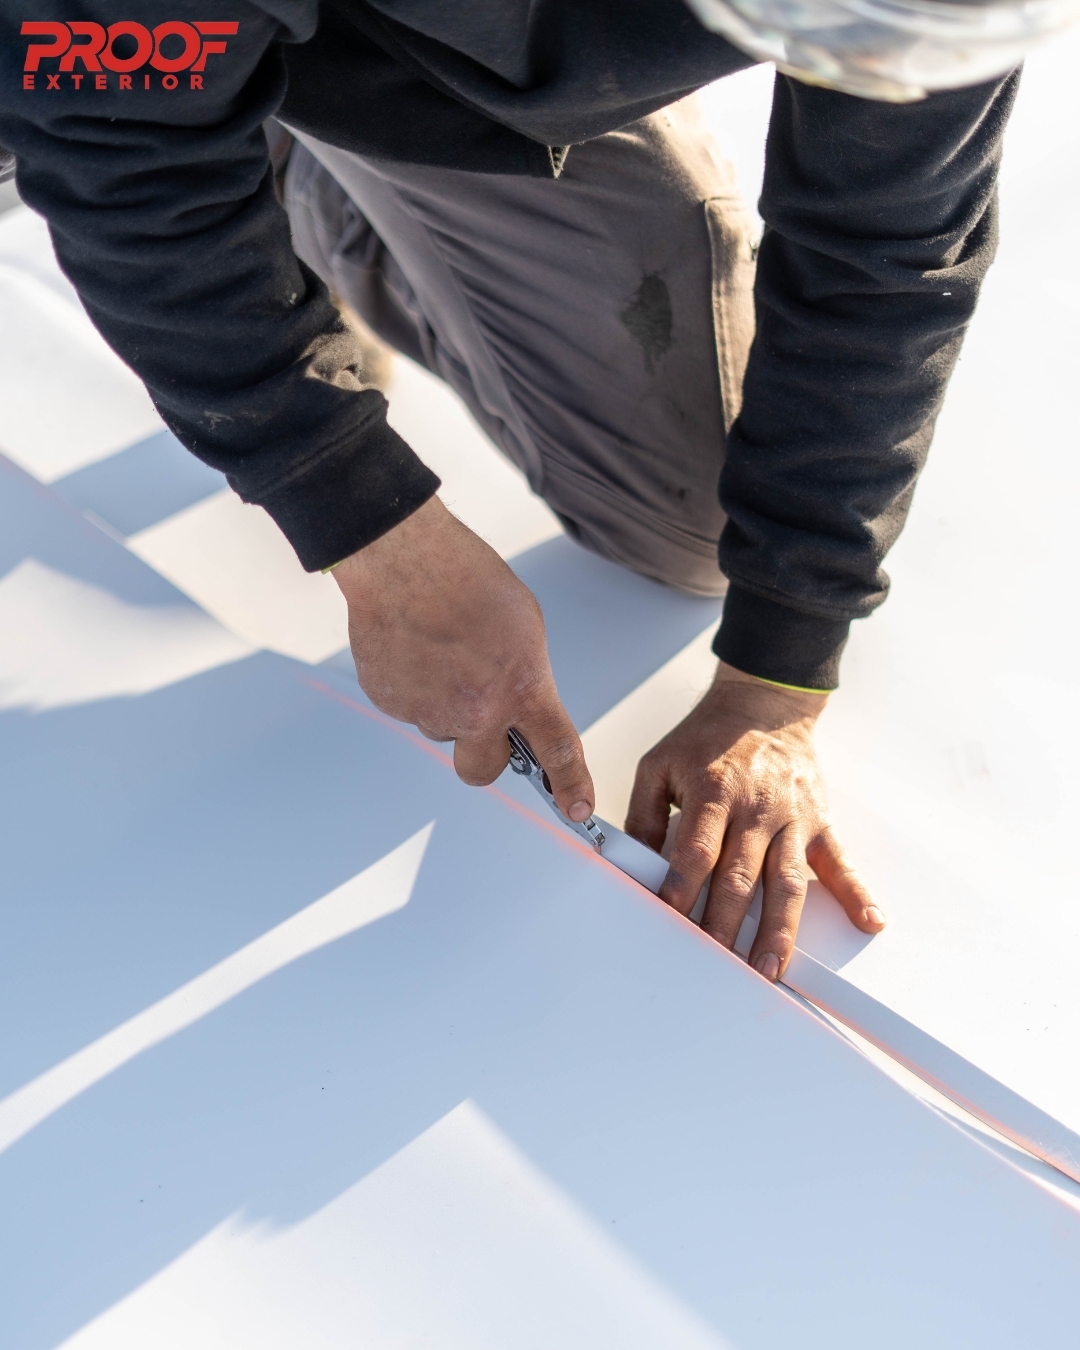 Our experienced professionals make it look easy!   #proofexterior #roofingser...